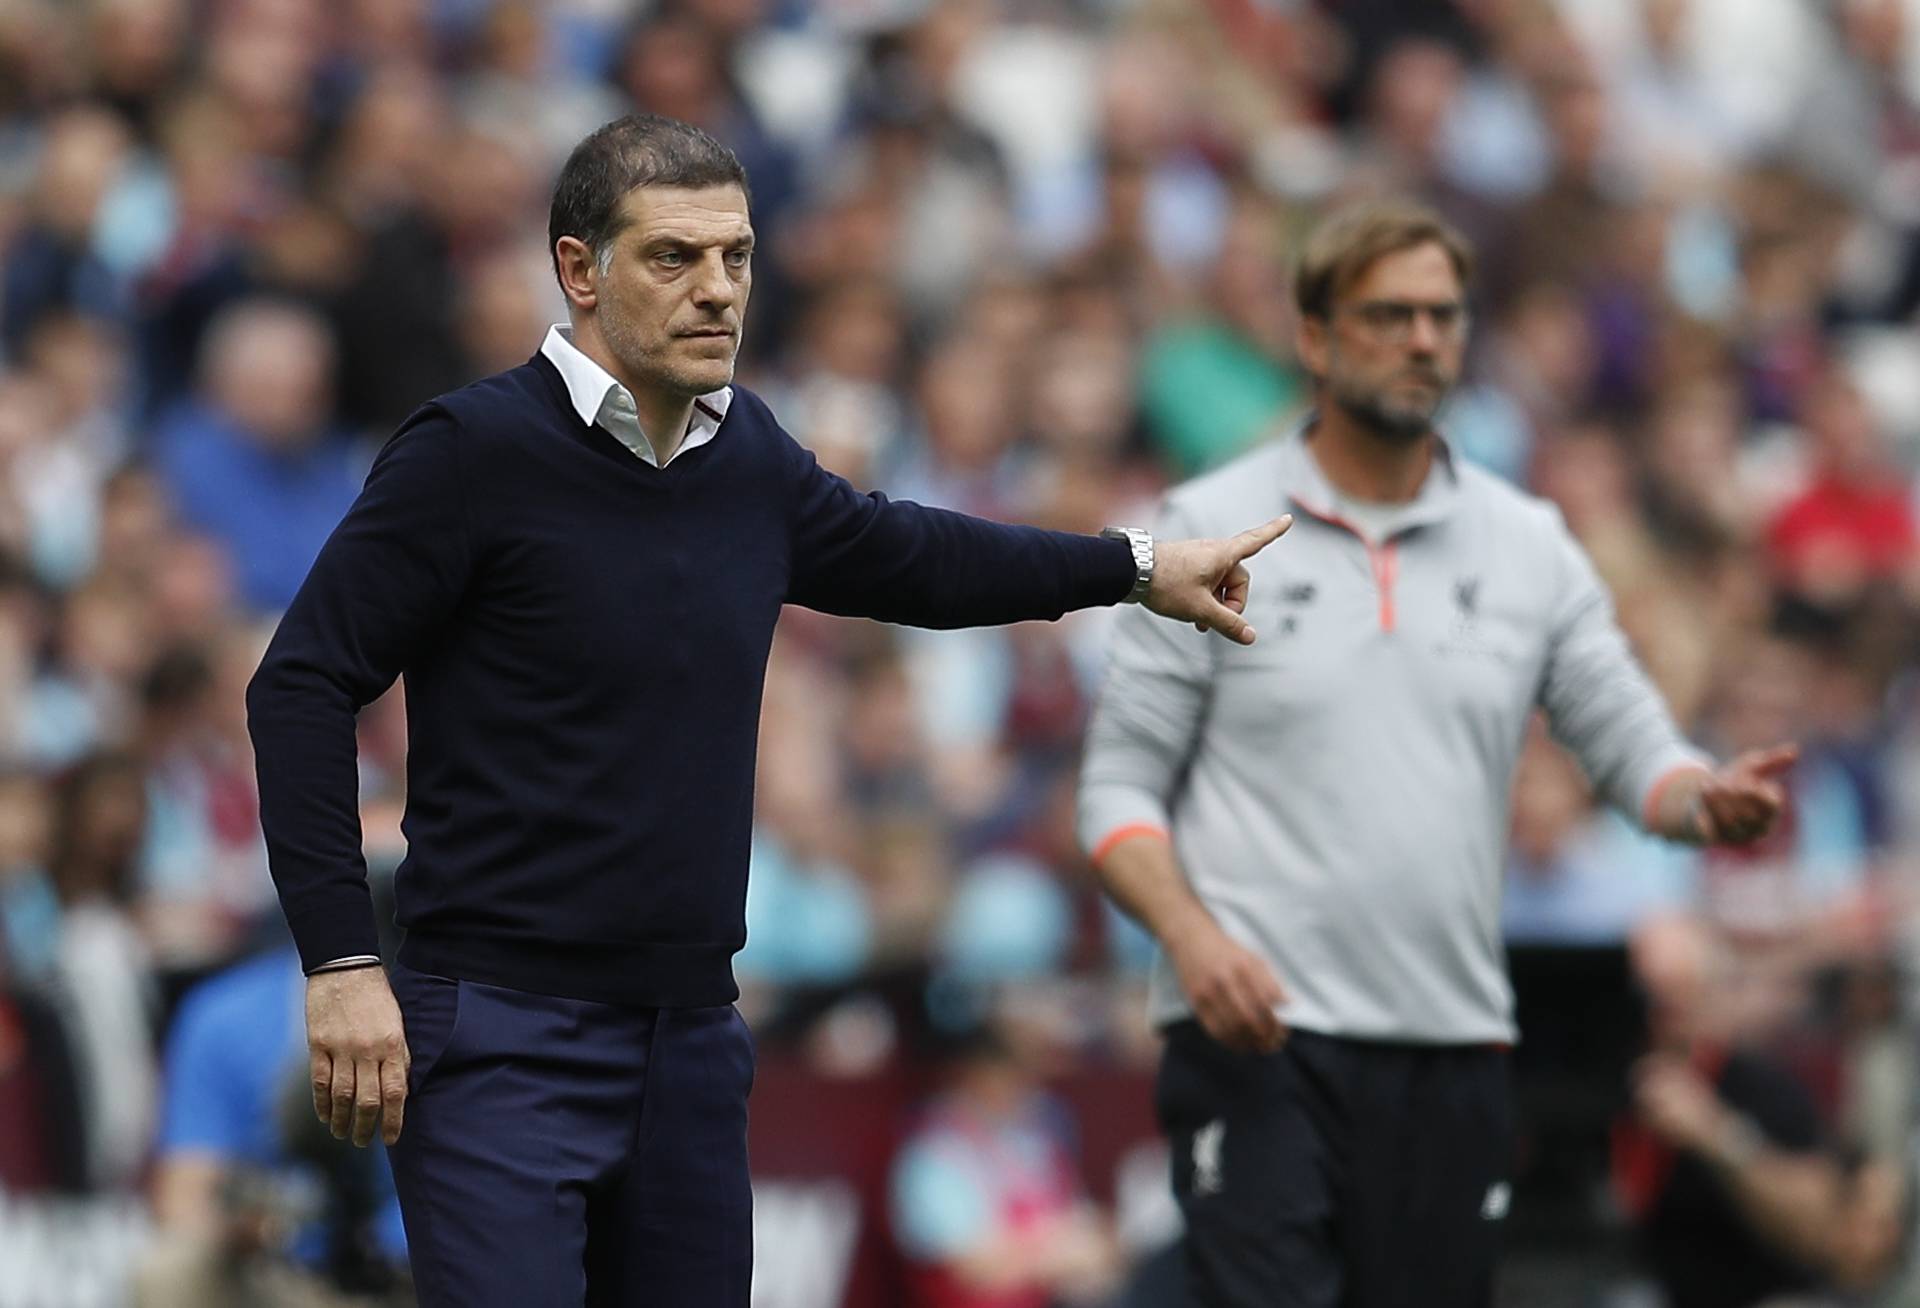 West Ham United manager Slaven Bilic and Liverpool manager Juergen Klopp